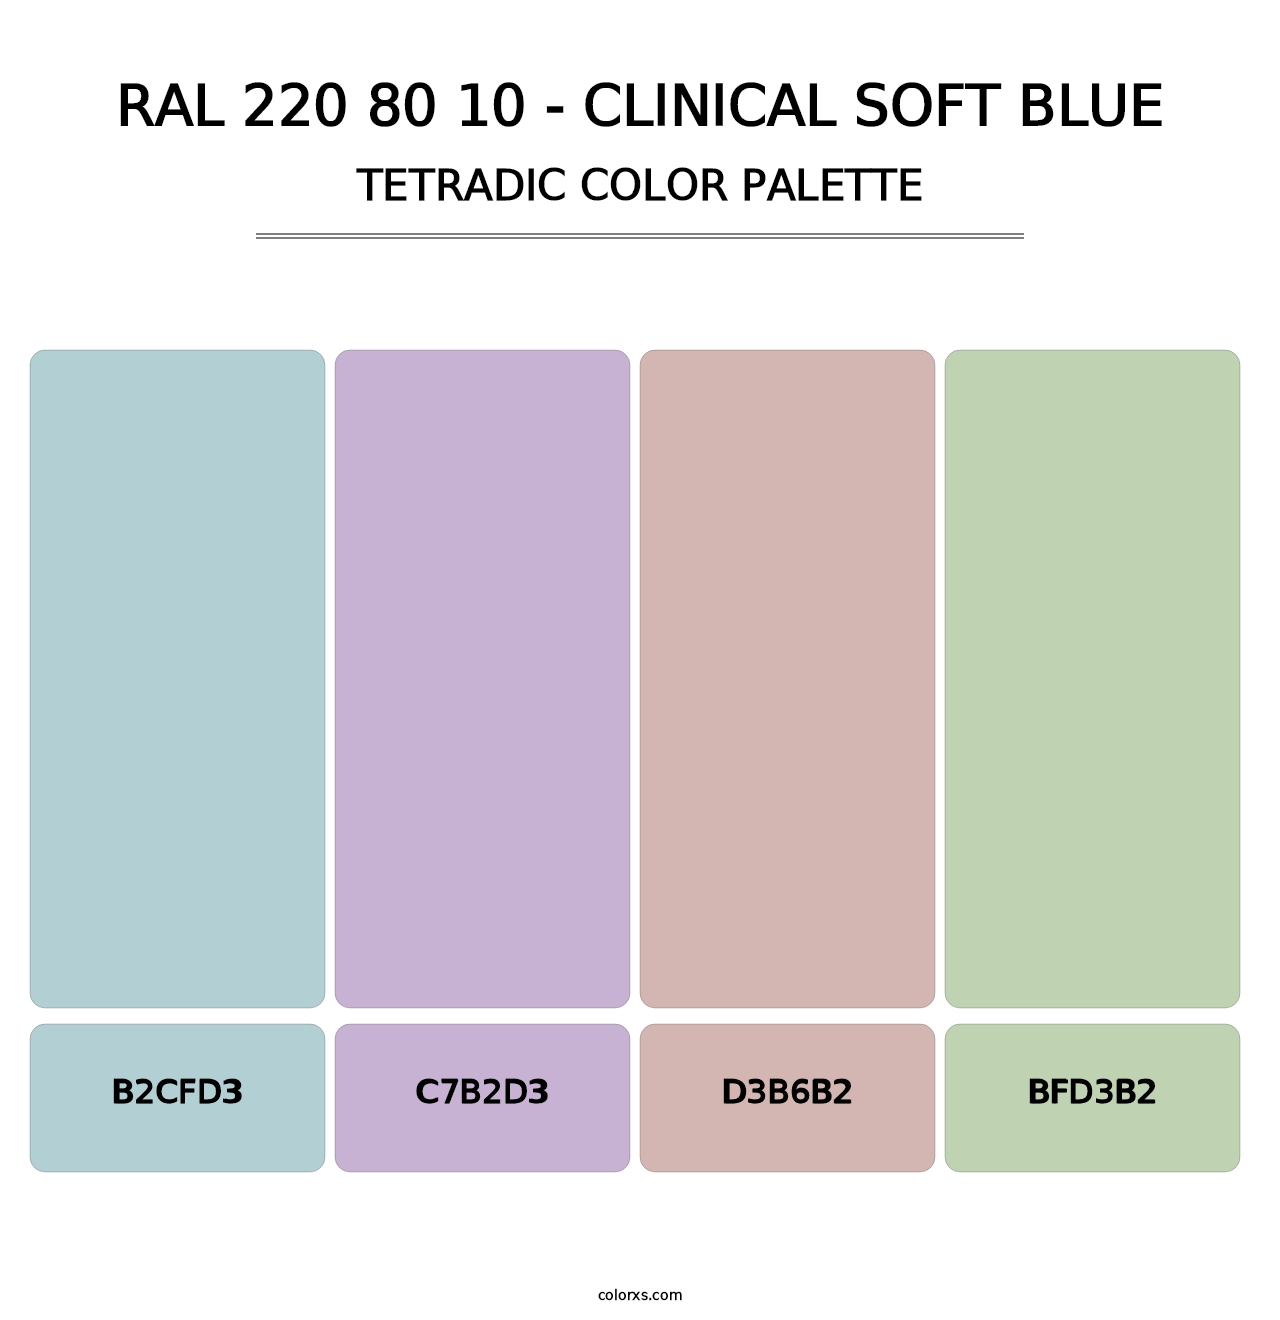 RAL 220 80 10 - Clinical Soft Blue - Tetradic Color Palette